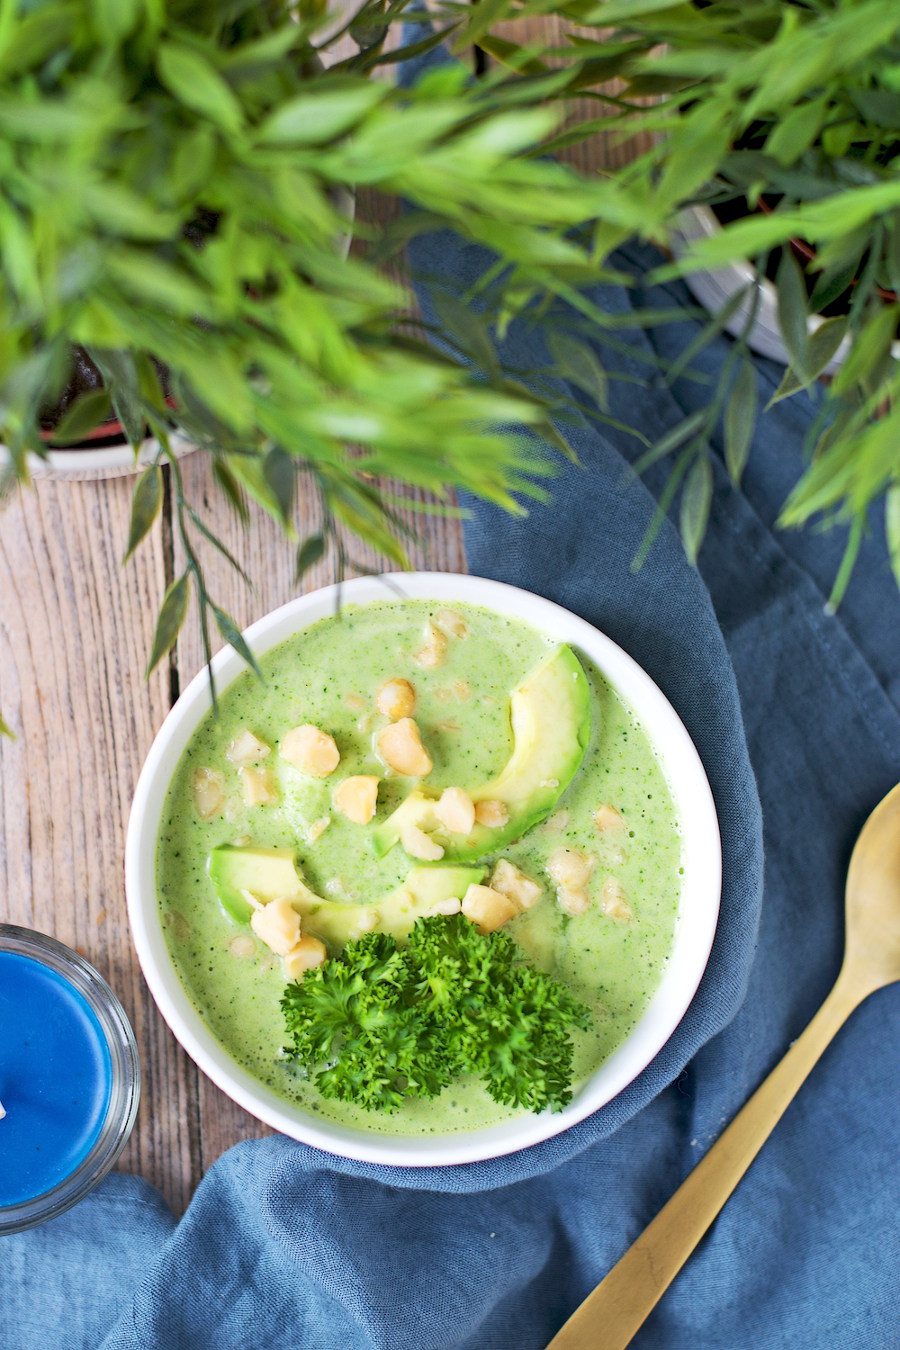 Closeup on the Detox Broccoli Soup showing parsley and avocado slices.